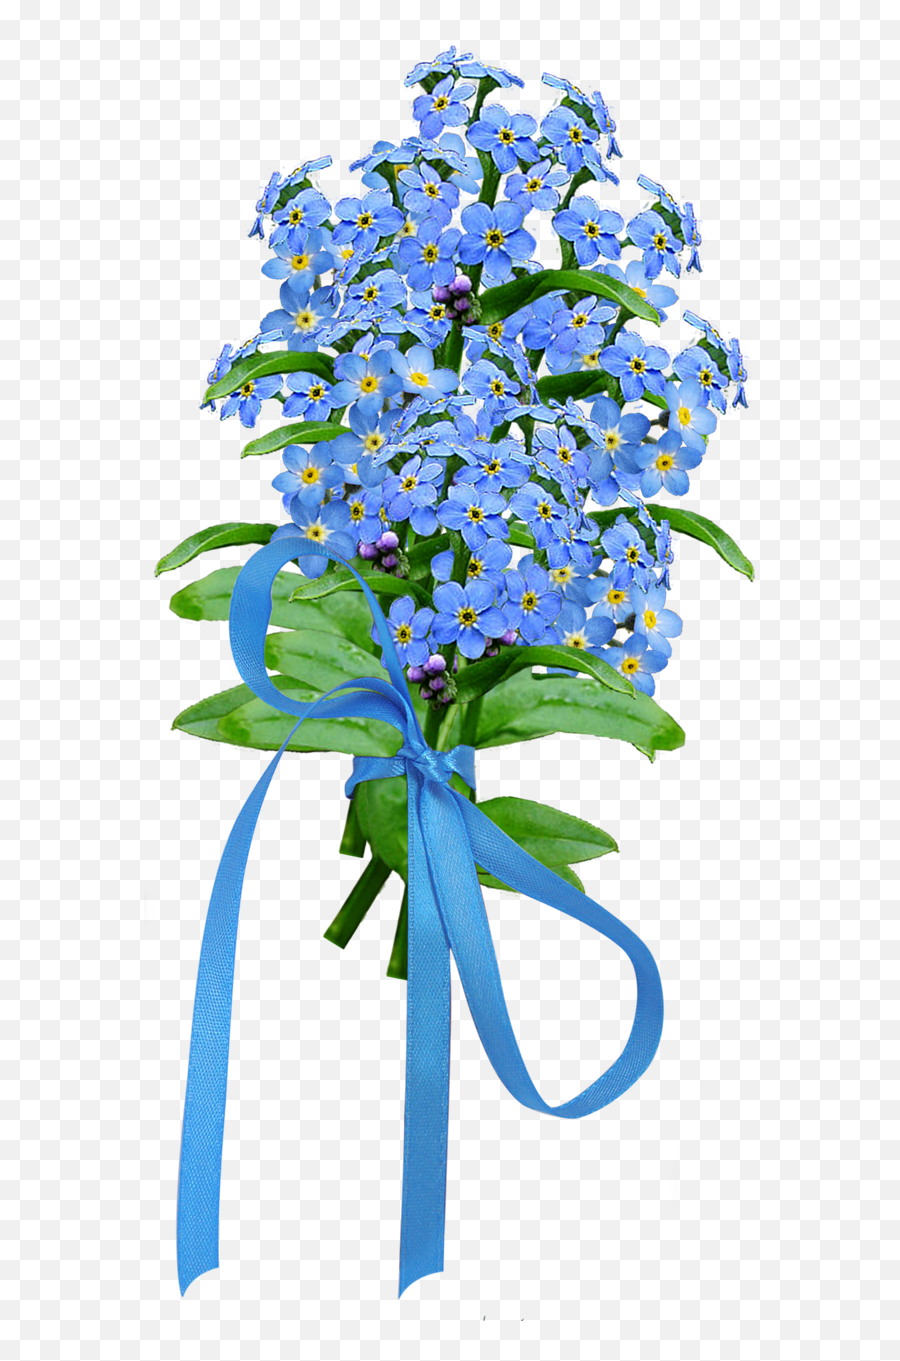 Forget Me Not Png Image - Blue Forget Me Not Bouquet Png,Forget Me Not Png